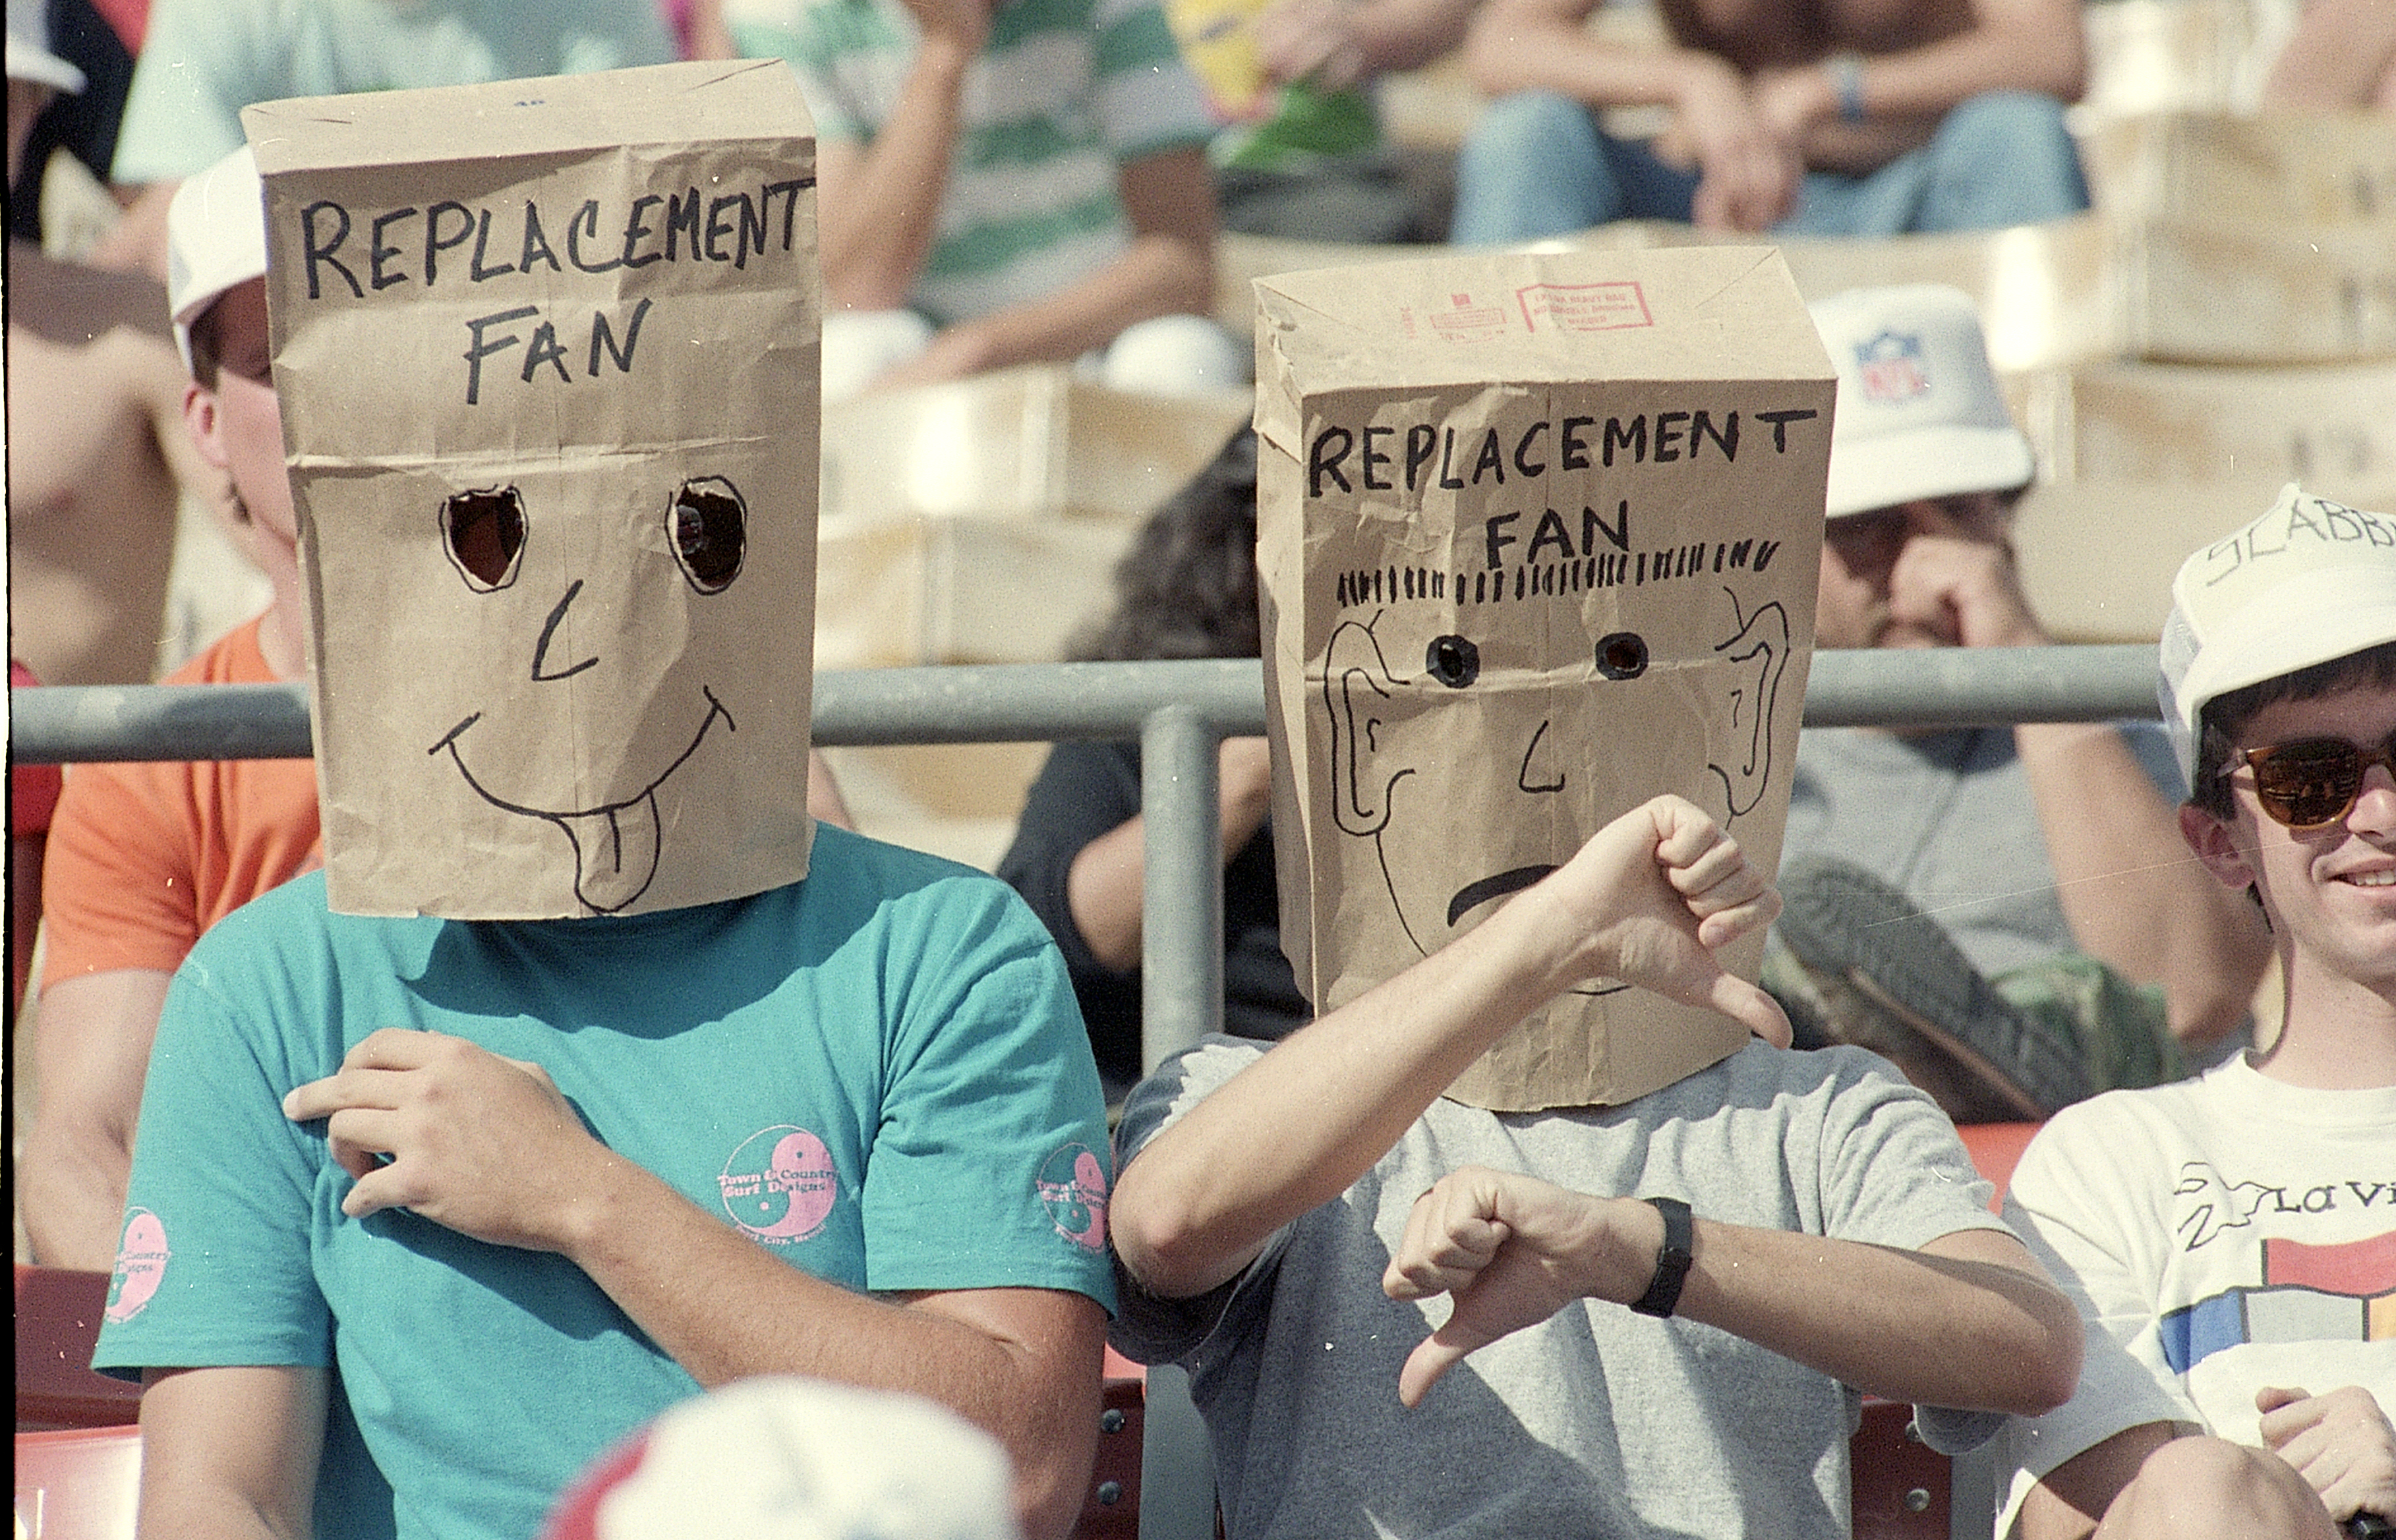 Fans Wear Paper Bag During Football Game